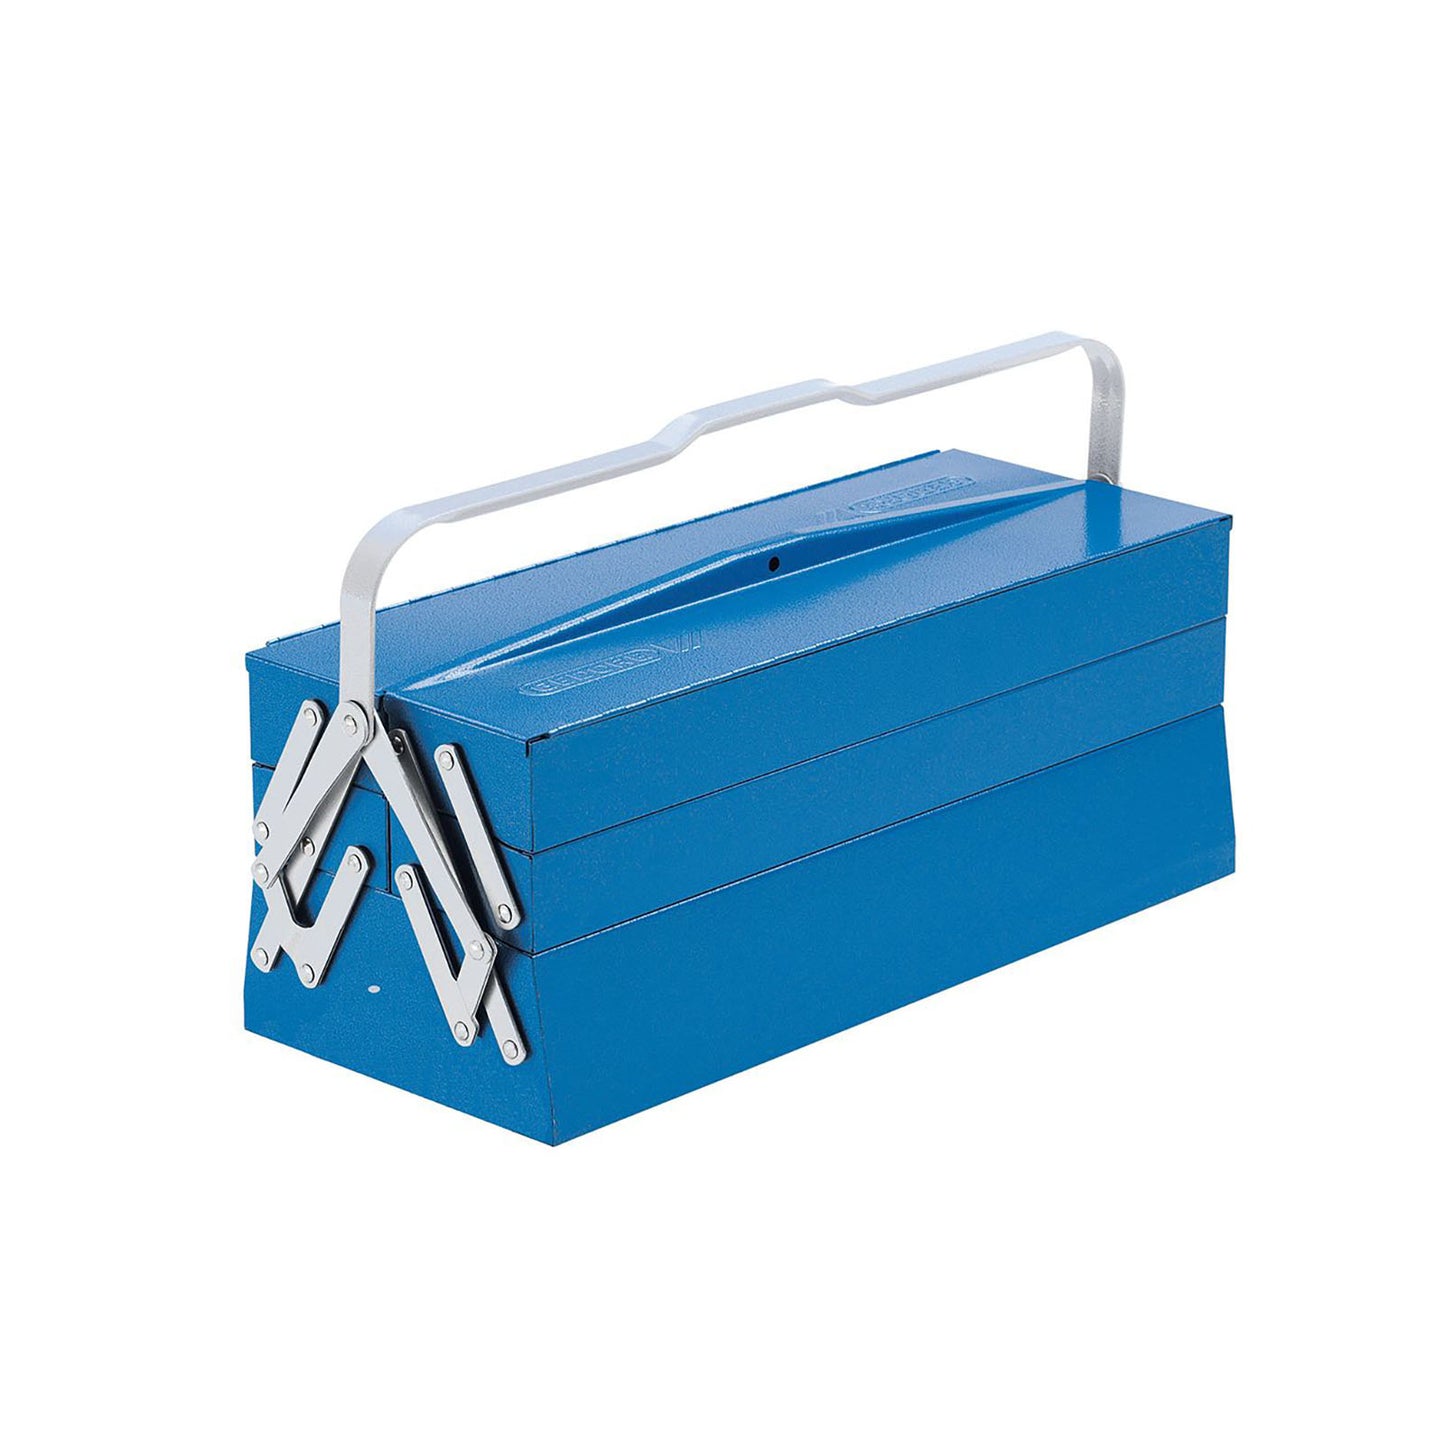 GEDORE 1335 L - Tool box with 5 compartments (6610580)